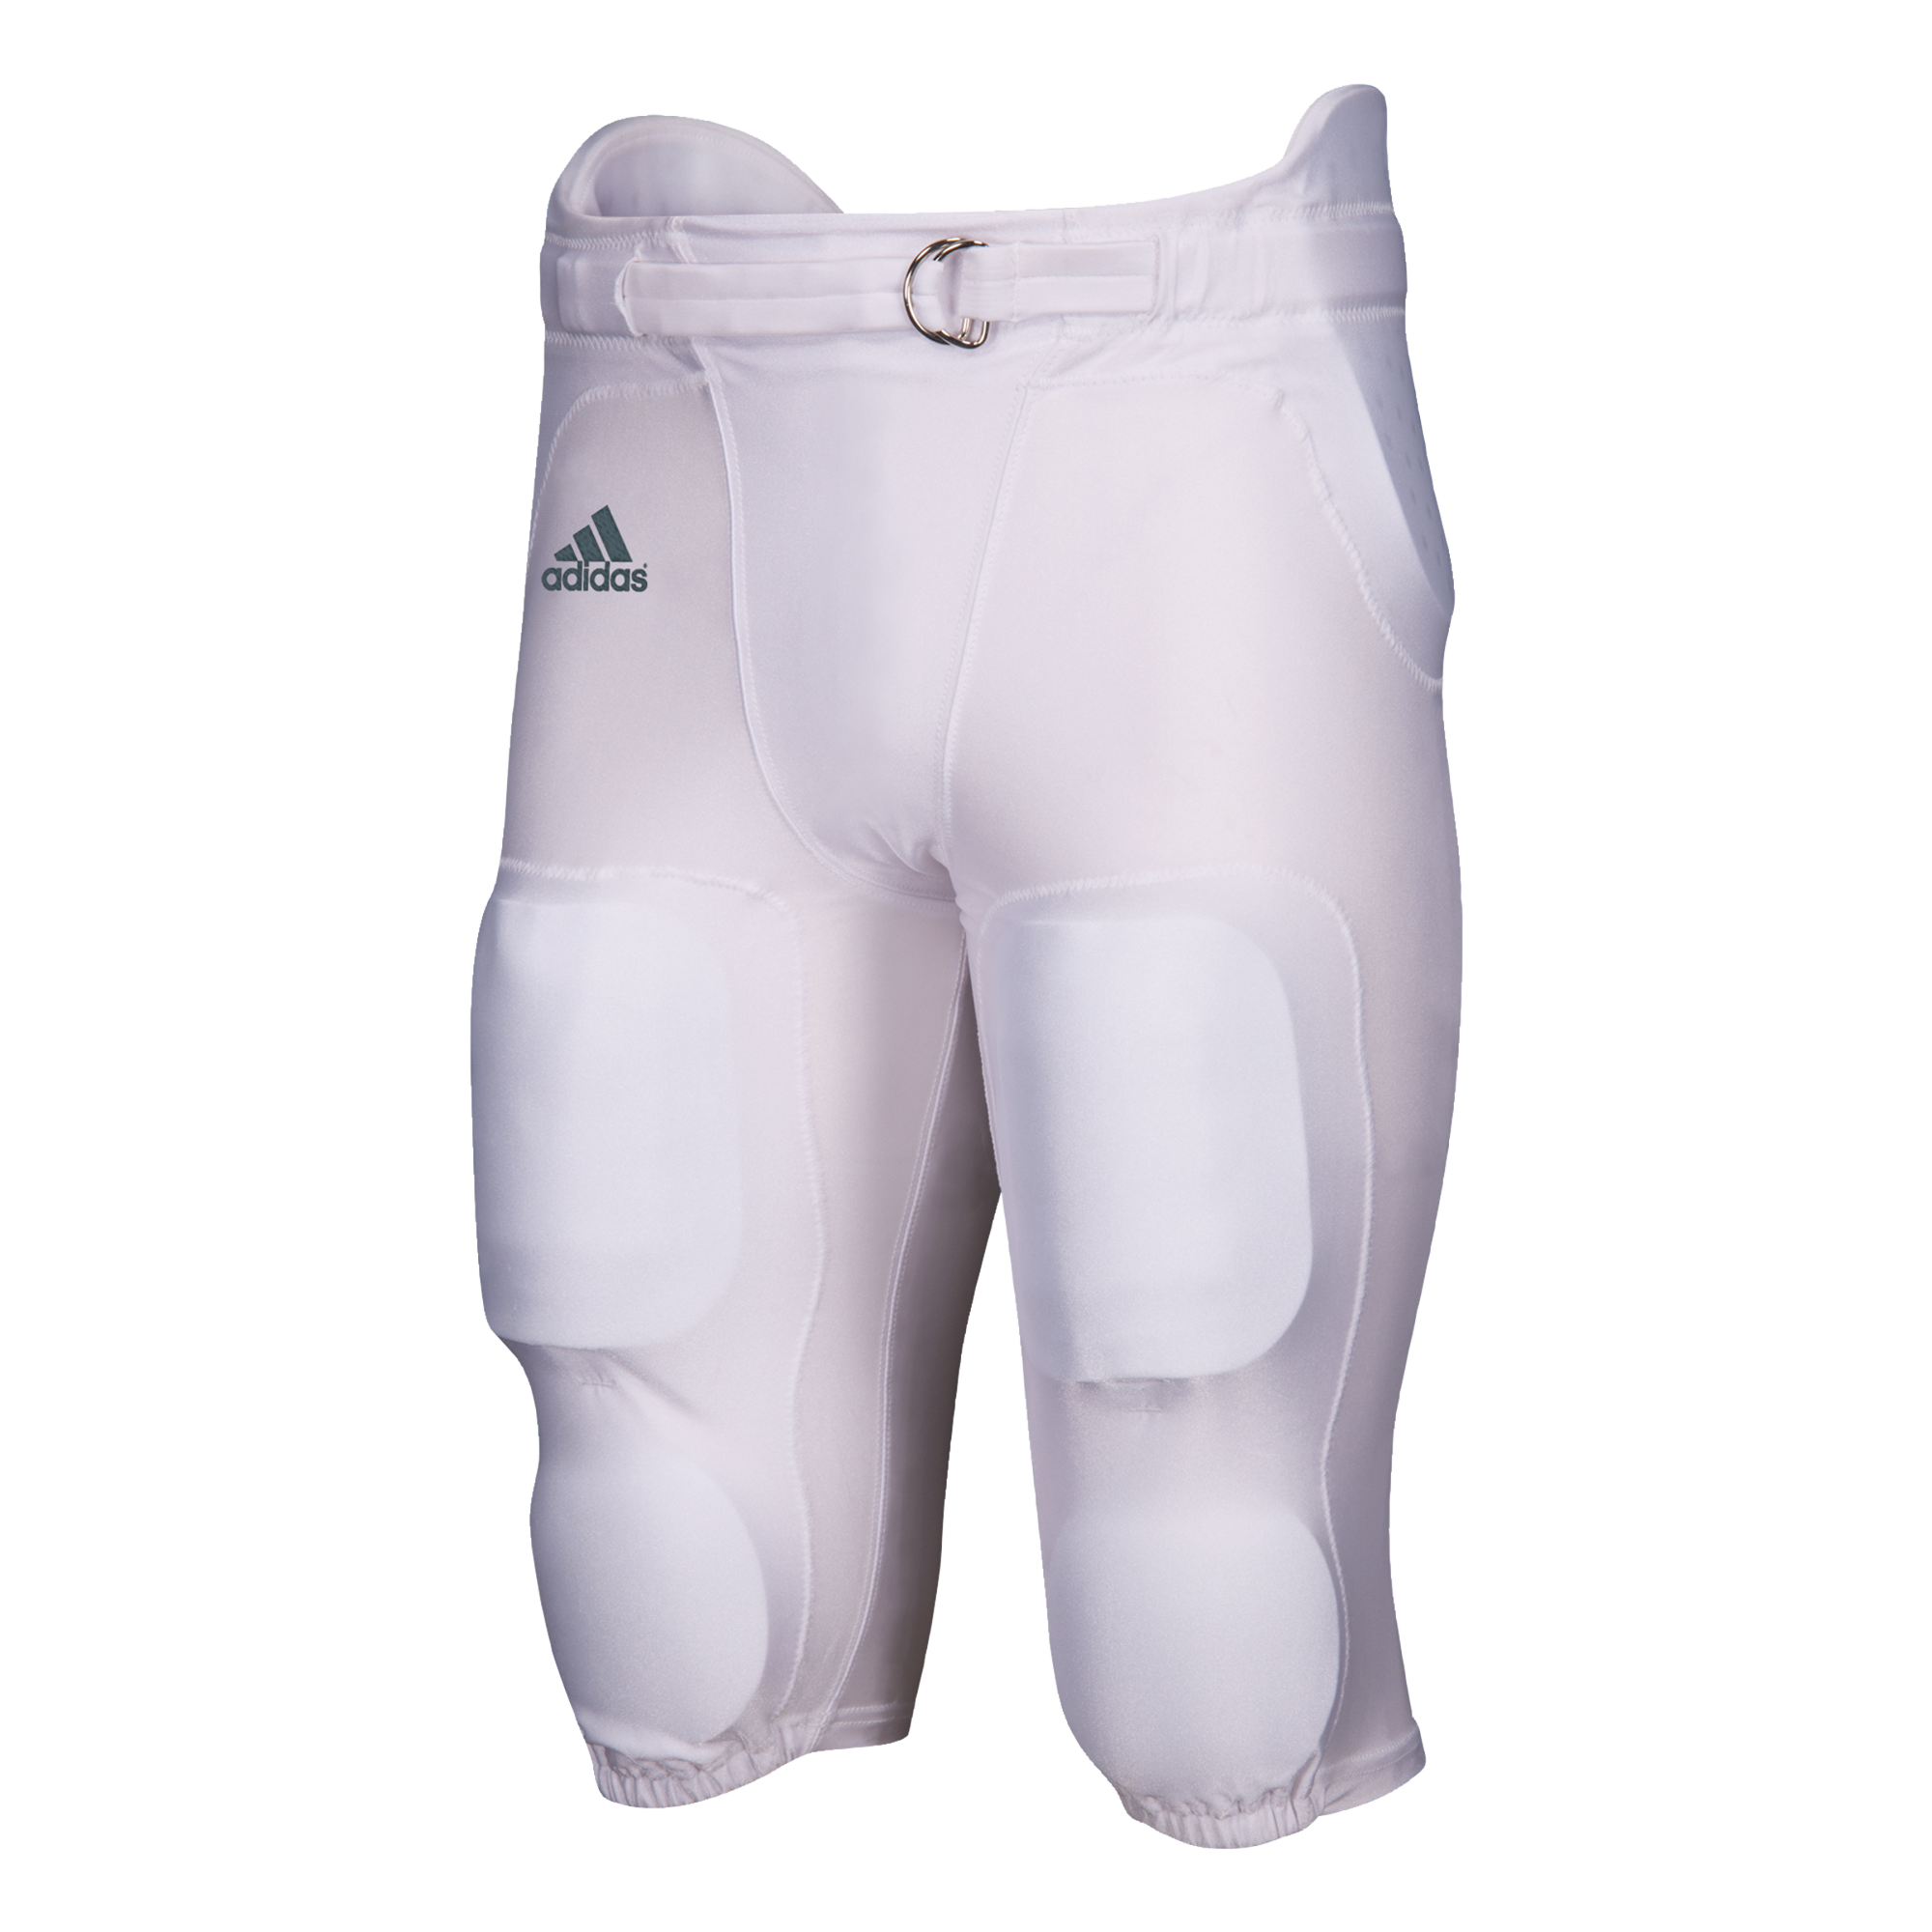 Football Practice Pants for sale